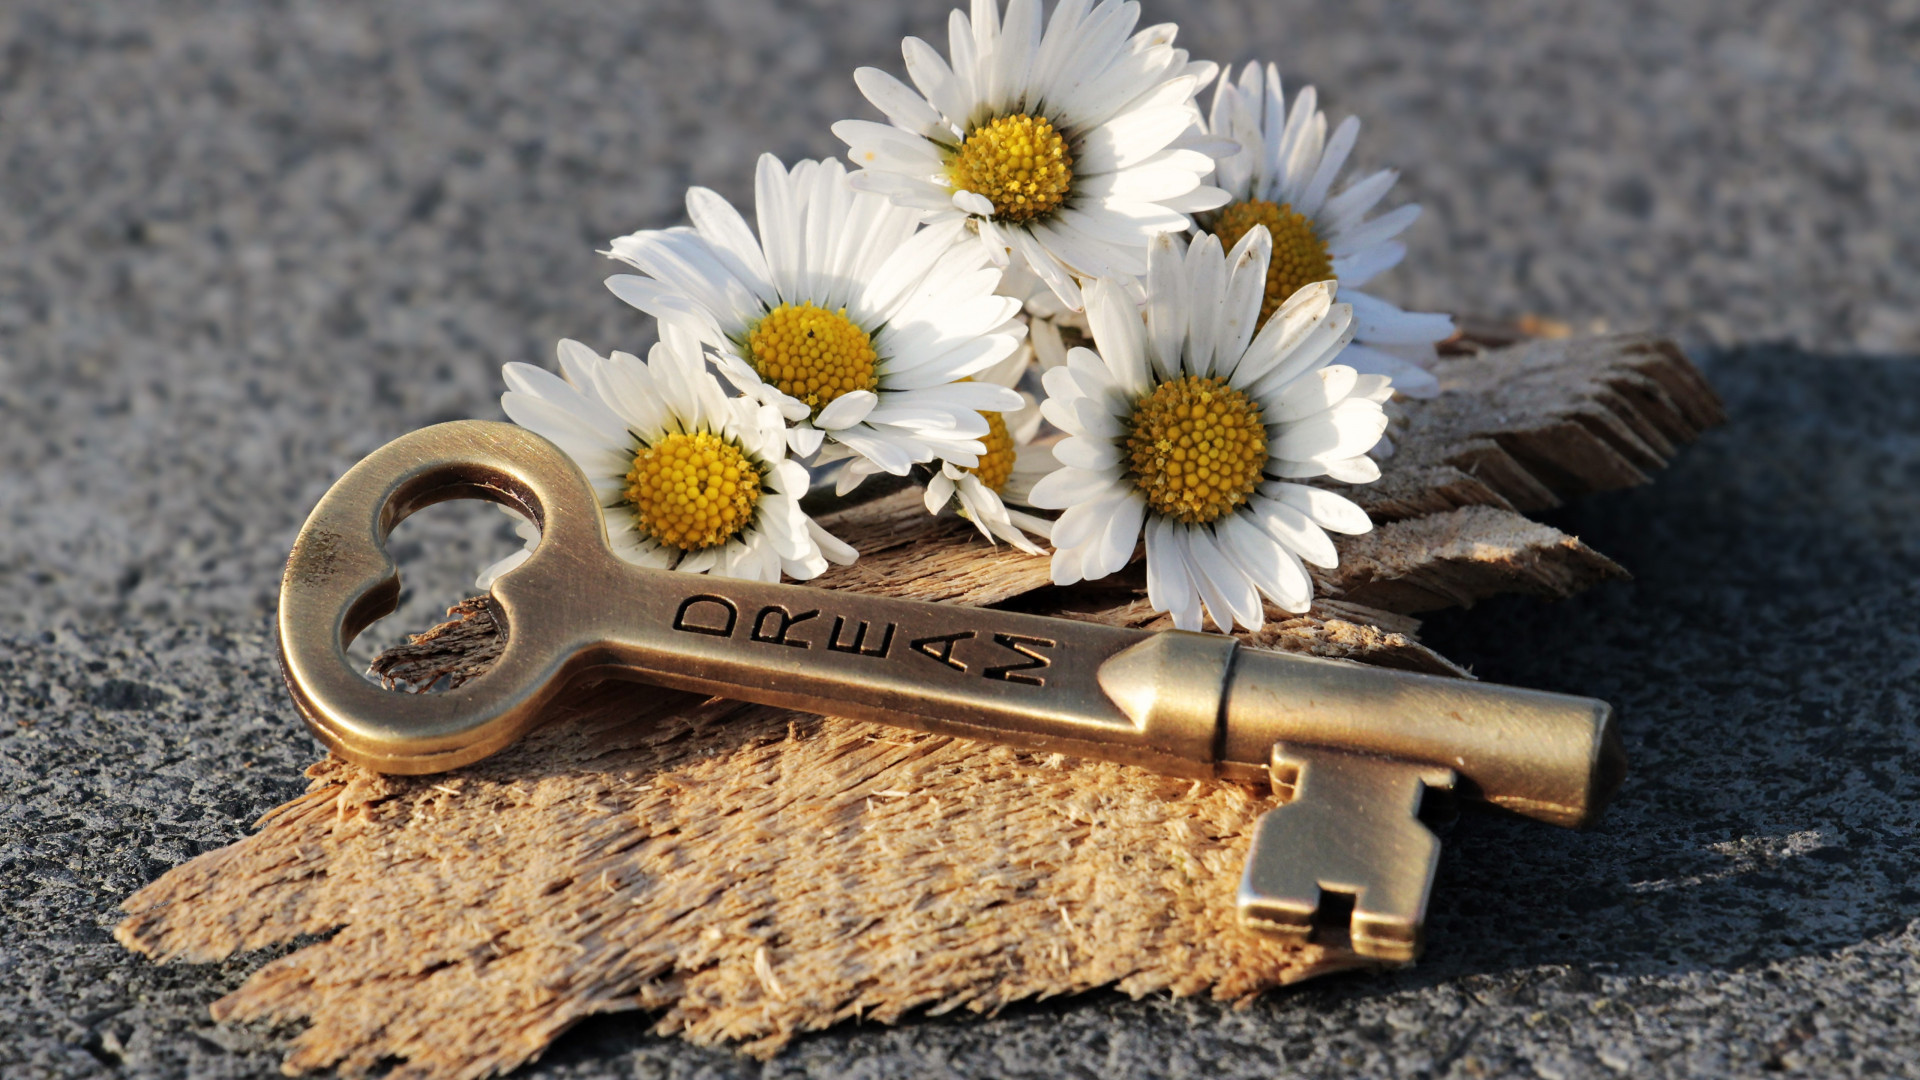 The dreams key and daisy flowers wallpaper 1920x1080